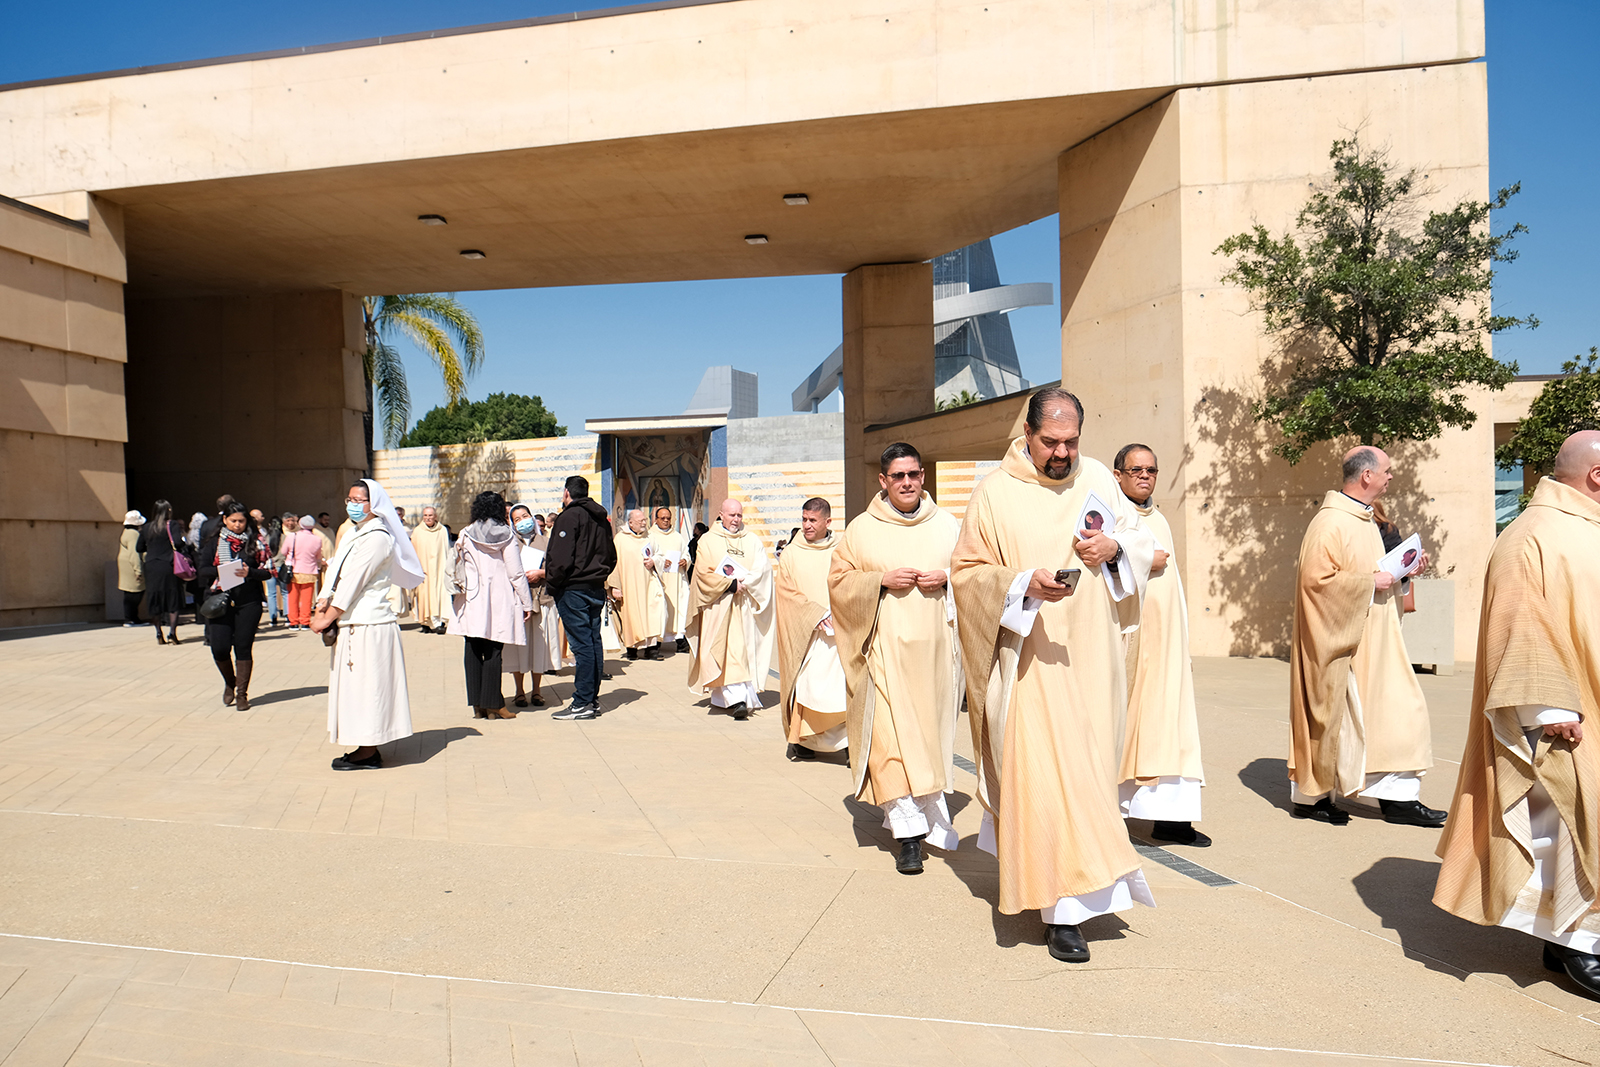 Clergy exit the Cathedral of Our Lady of the Angel after the funeral Mass for Bishop David O'Connell on Friday, March 3, 2023, in Los Angeles. RNS photo by Alejandra Molina